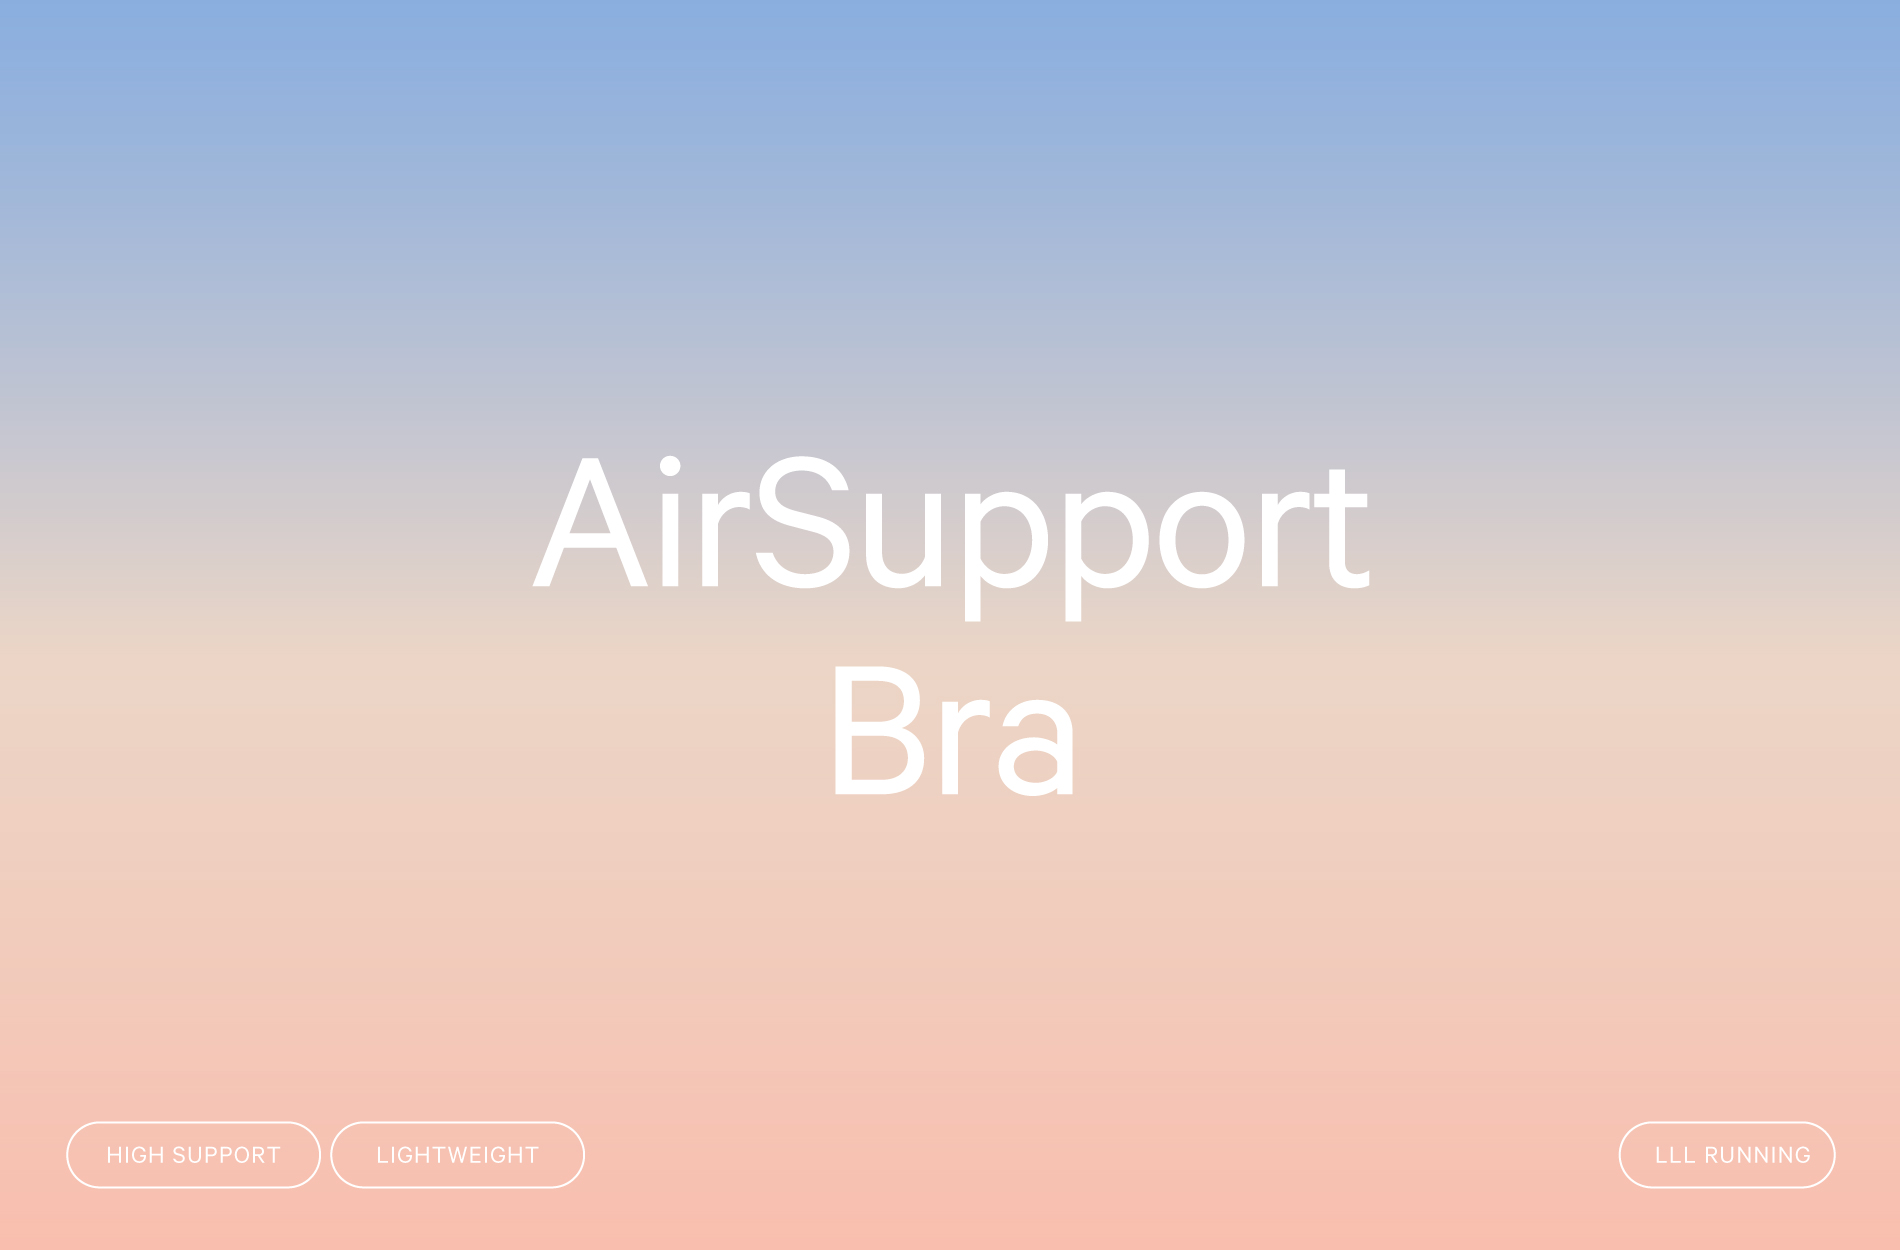 Jackie Beale Captures Lululemon's Air Support Bra Campaign